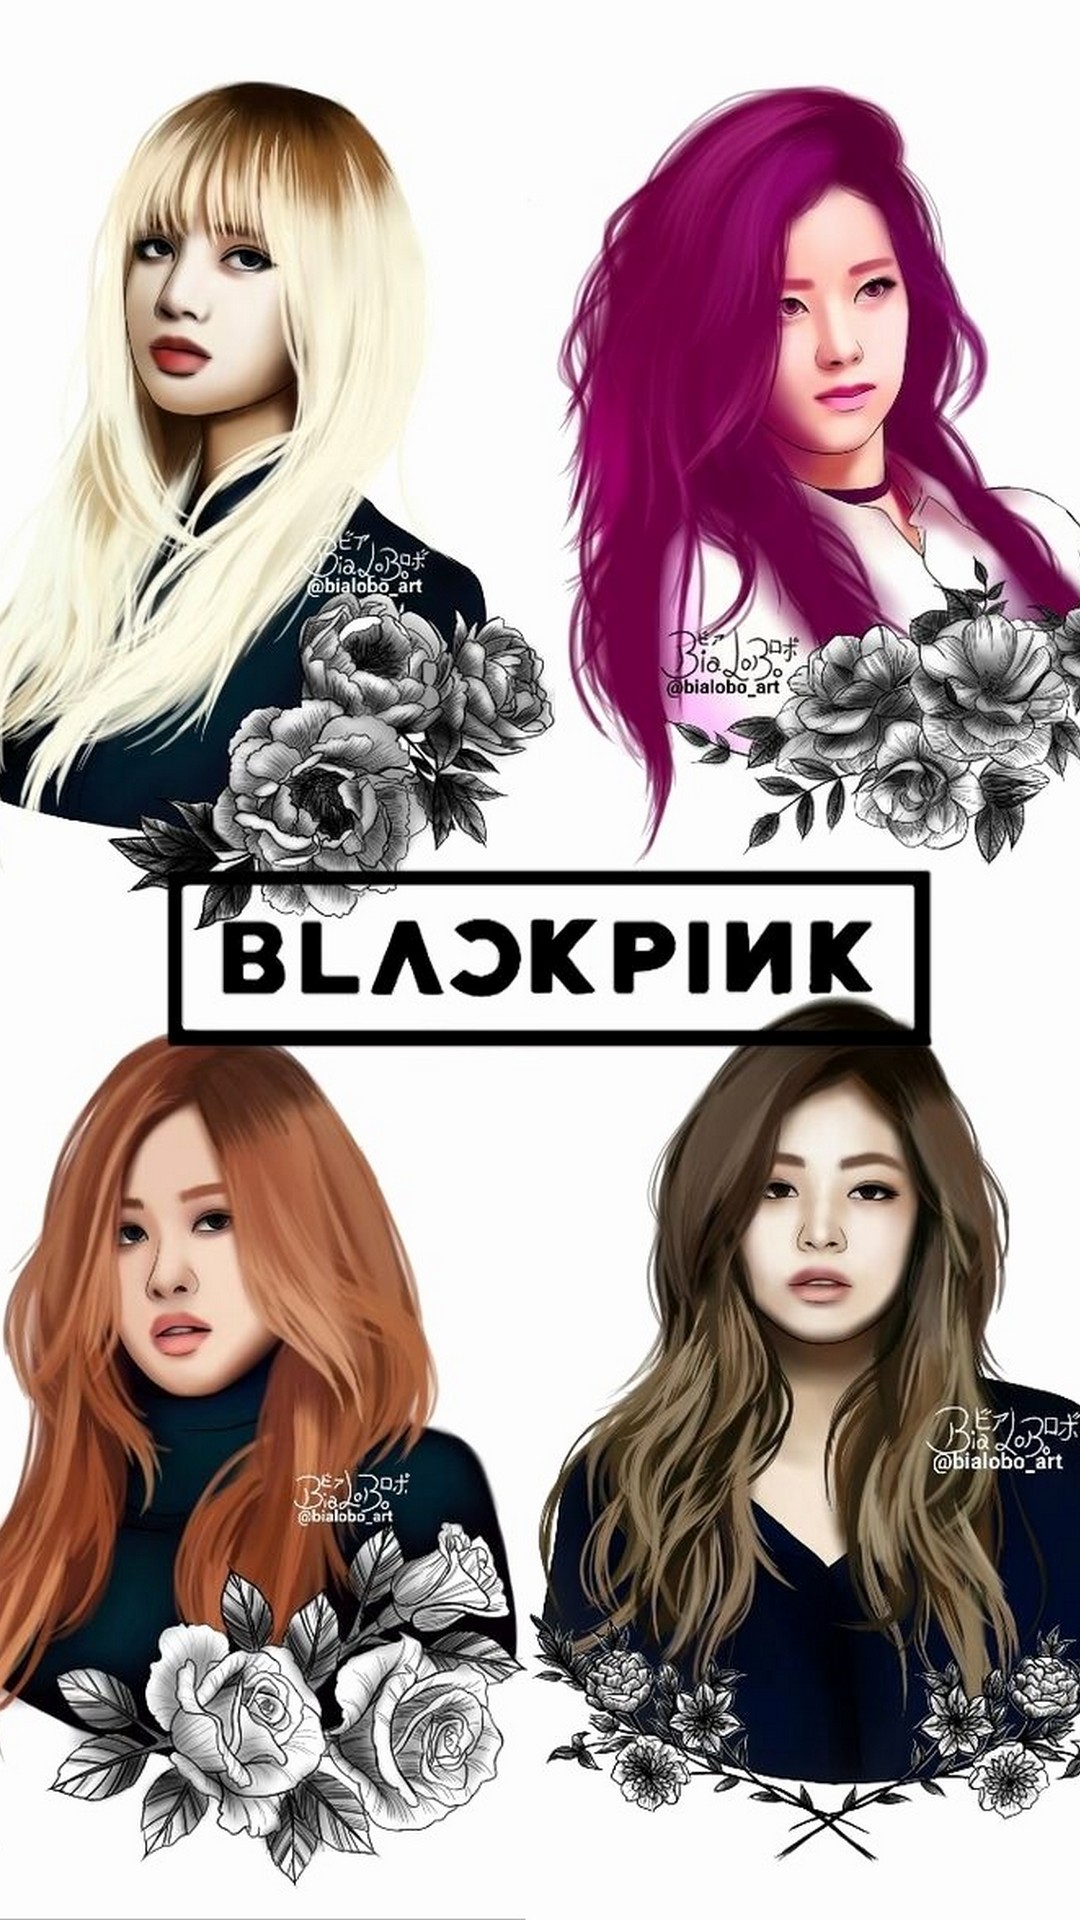 Wallpaper Blackpink for iPhone with high-resolution 1080x1920 pixel. You can use this wallpaper for your iPhone 5, 6, 7, 8, X, XS, XR backgrounds, Mobile Screensaver, or iPad Lock Screen